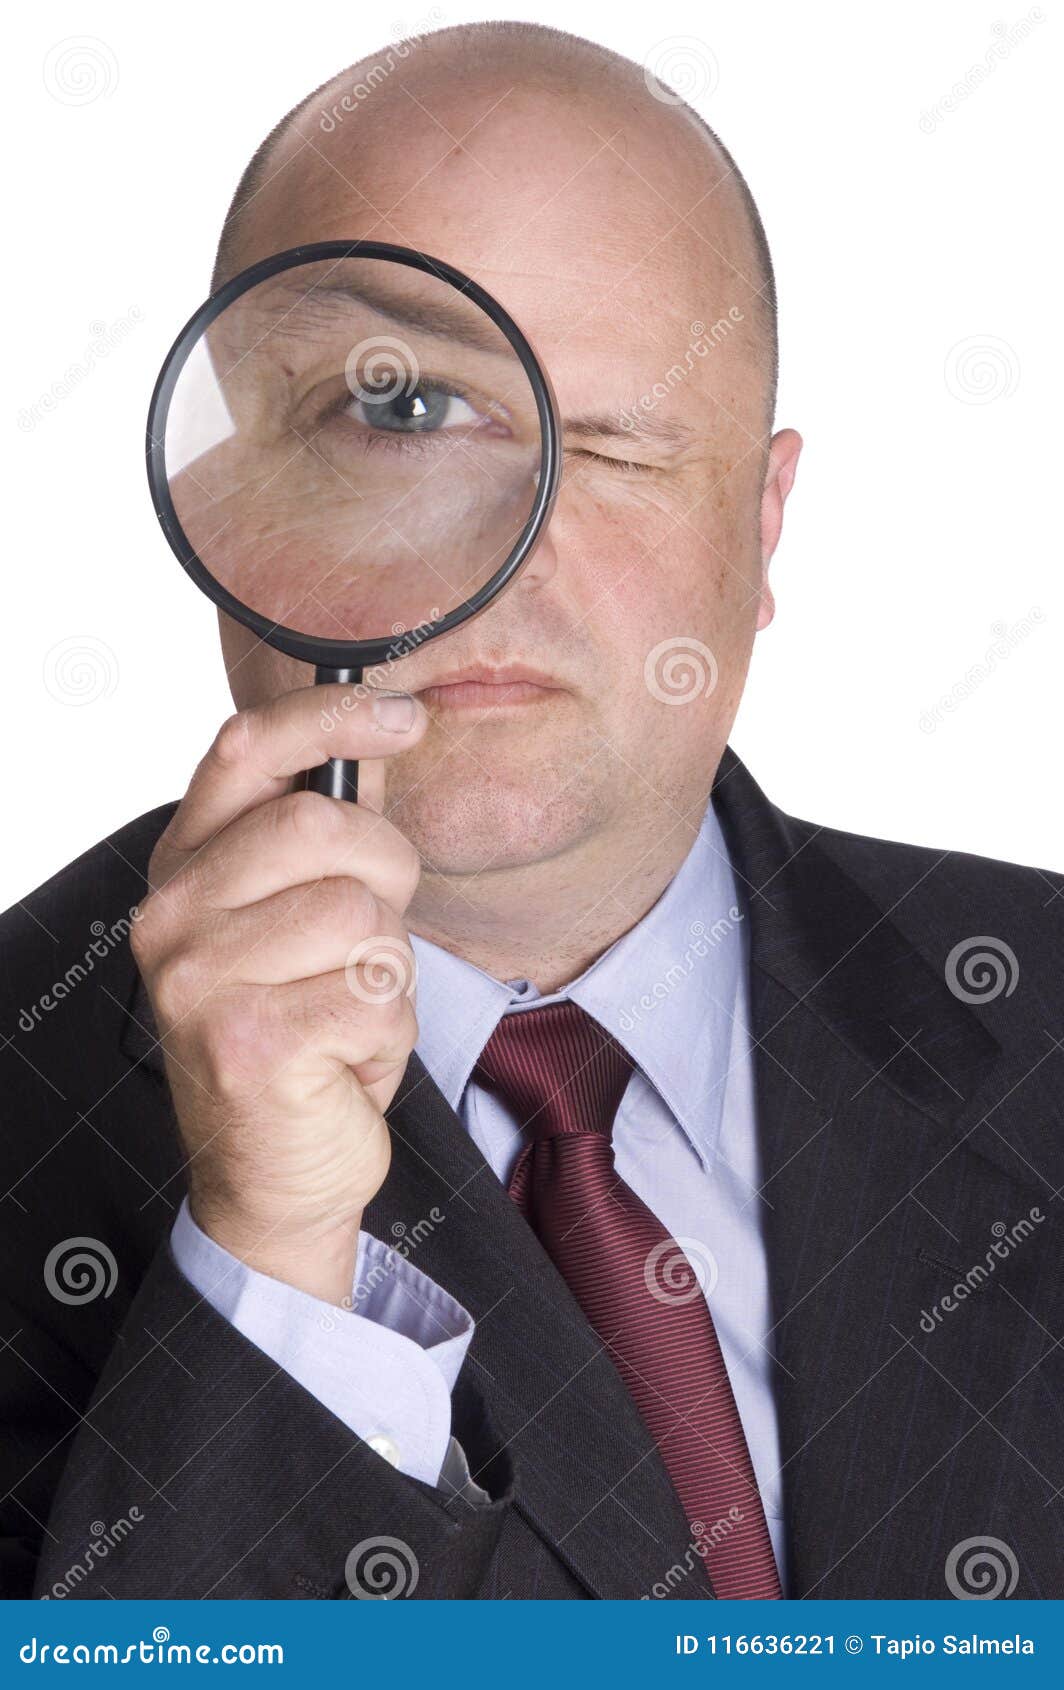 Check the Fine Print Business Concept Stock Image - Image of curiosity,  isolated: 116636221